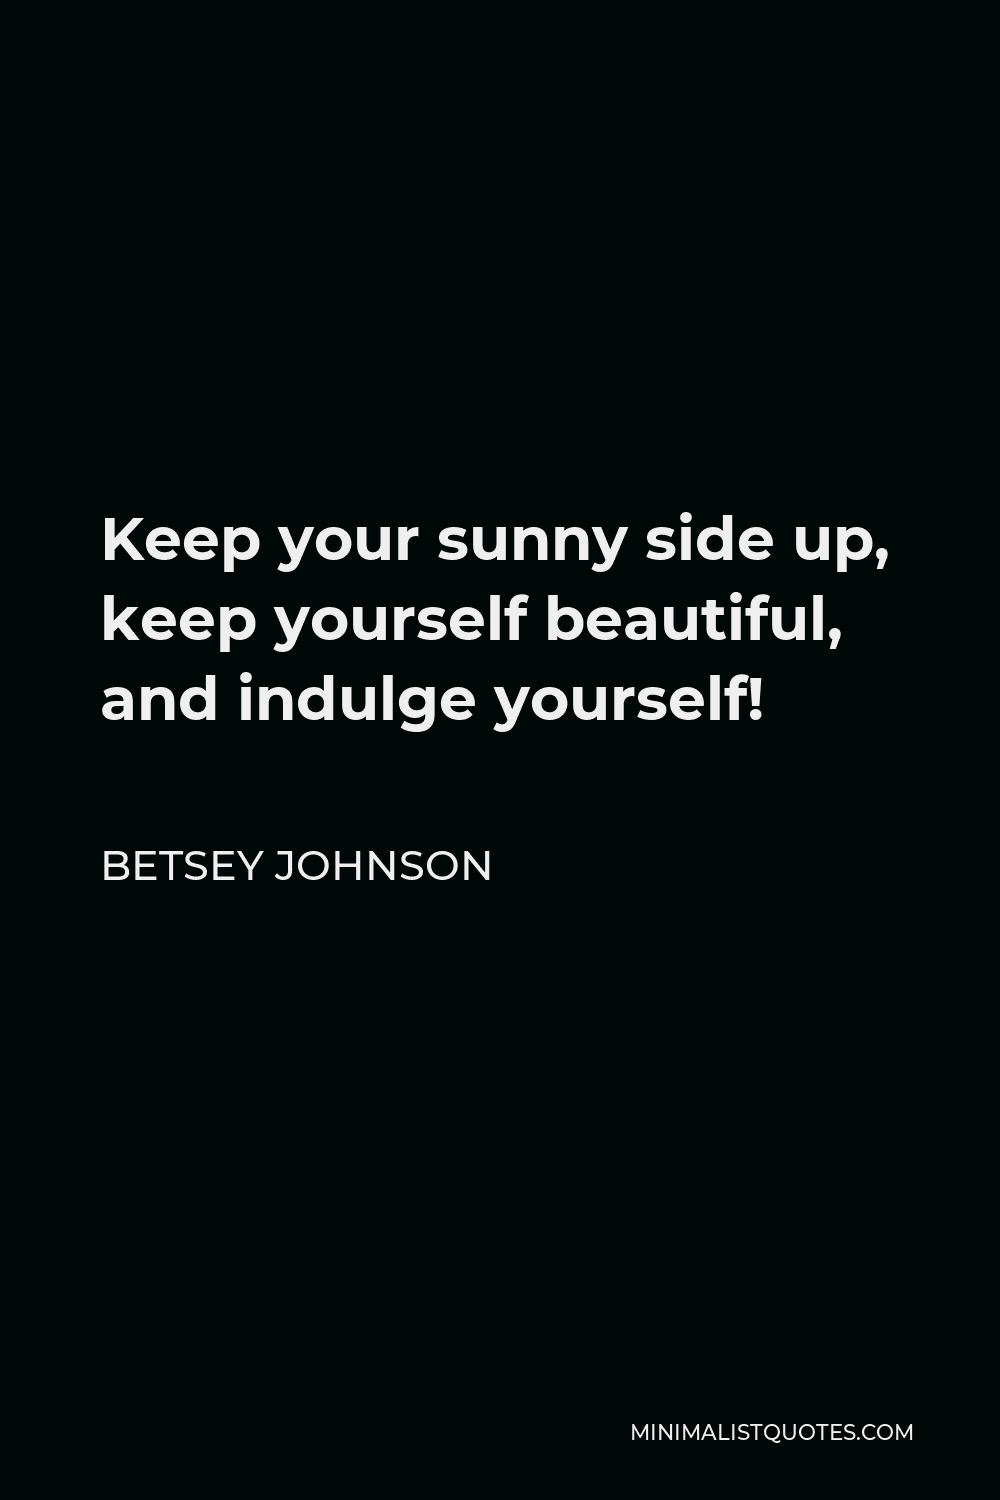 Betsey Johnson Quote - Keep your sunny side up, keep yourself beautiful, and indulge yourself!